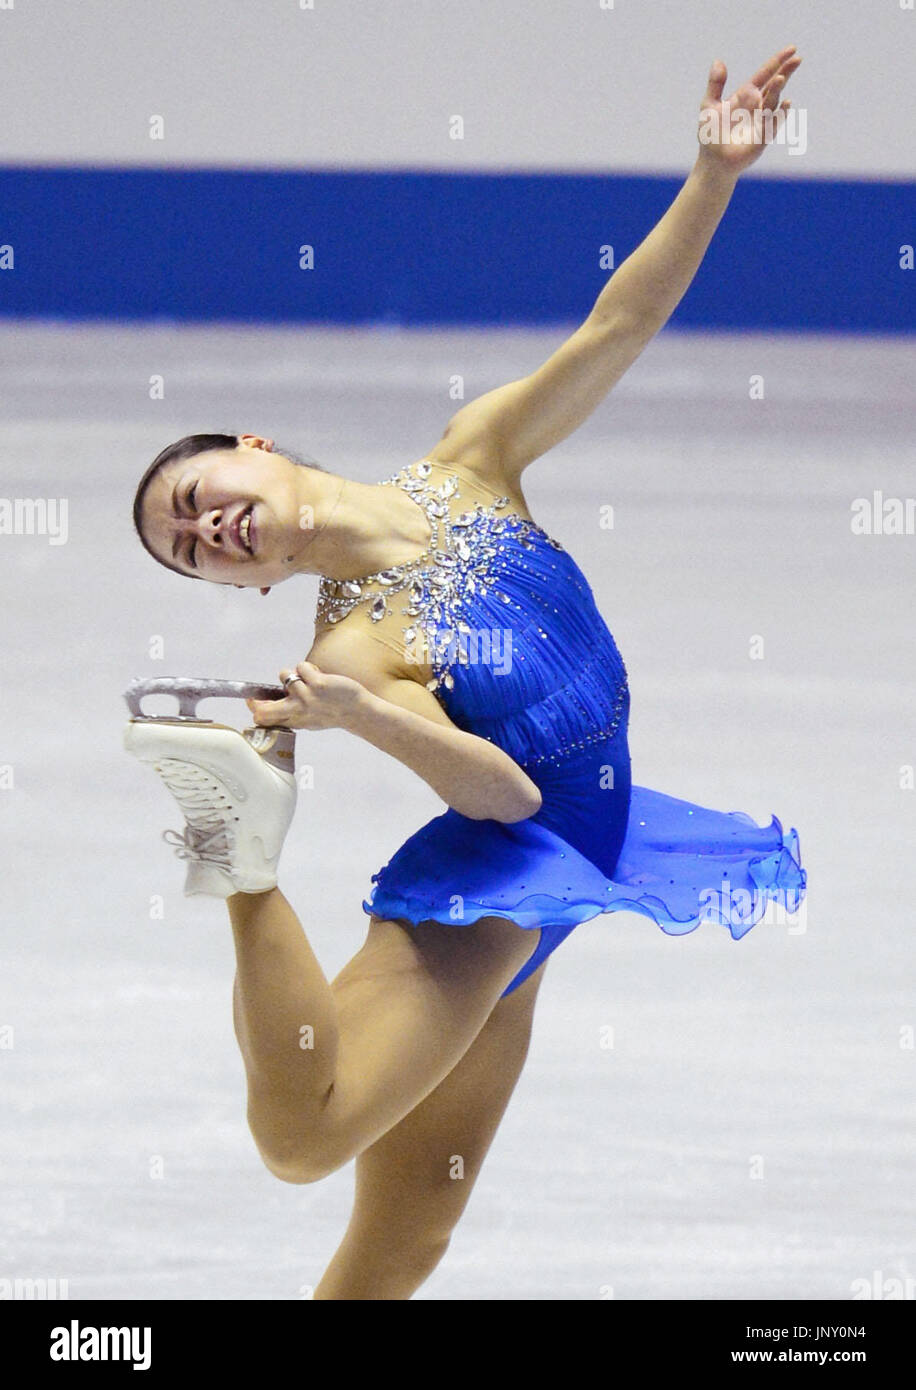 TOKYO, Japan - Akiko Suzuki performs during the free skate of the ISU World Team Trophy in Tokyo on April 21, 2012. She captured the women's title with a personal best score as host Japan won the competition for the first time. (Kyodo) Stock Photo